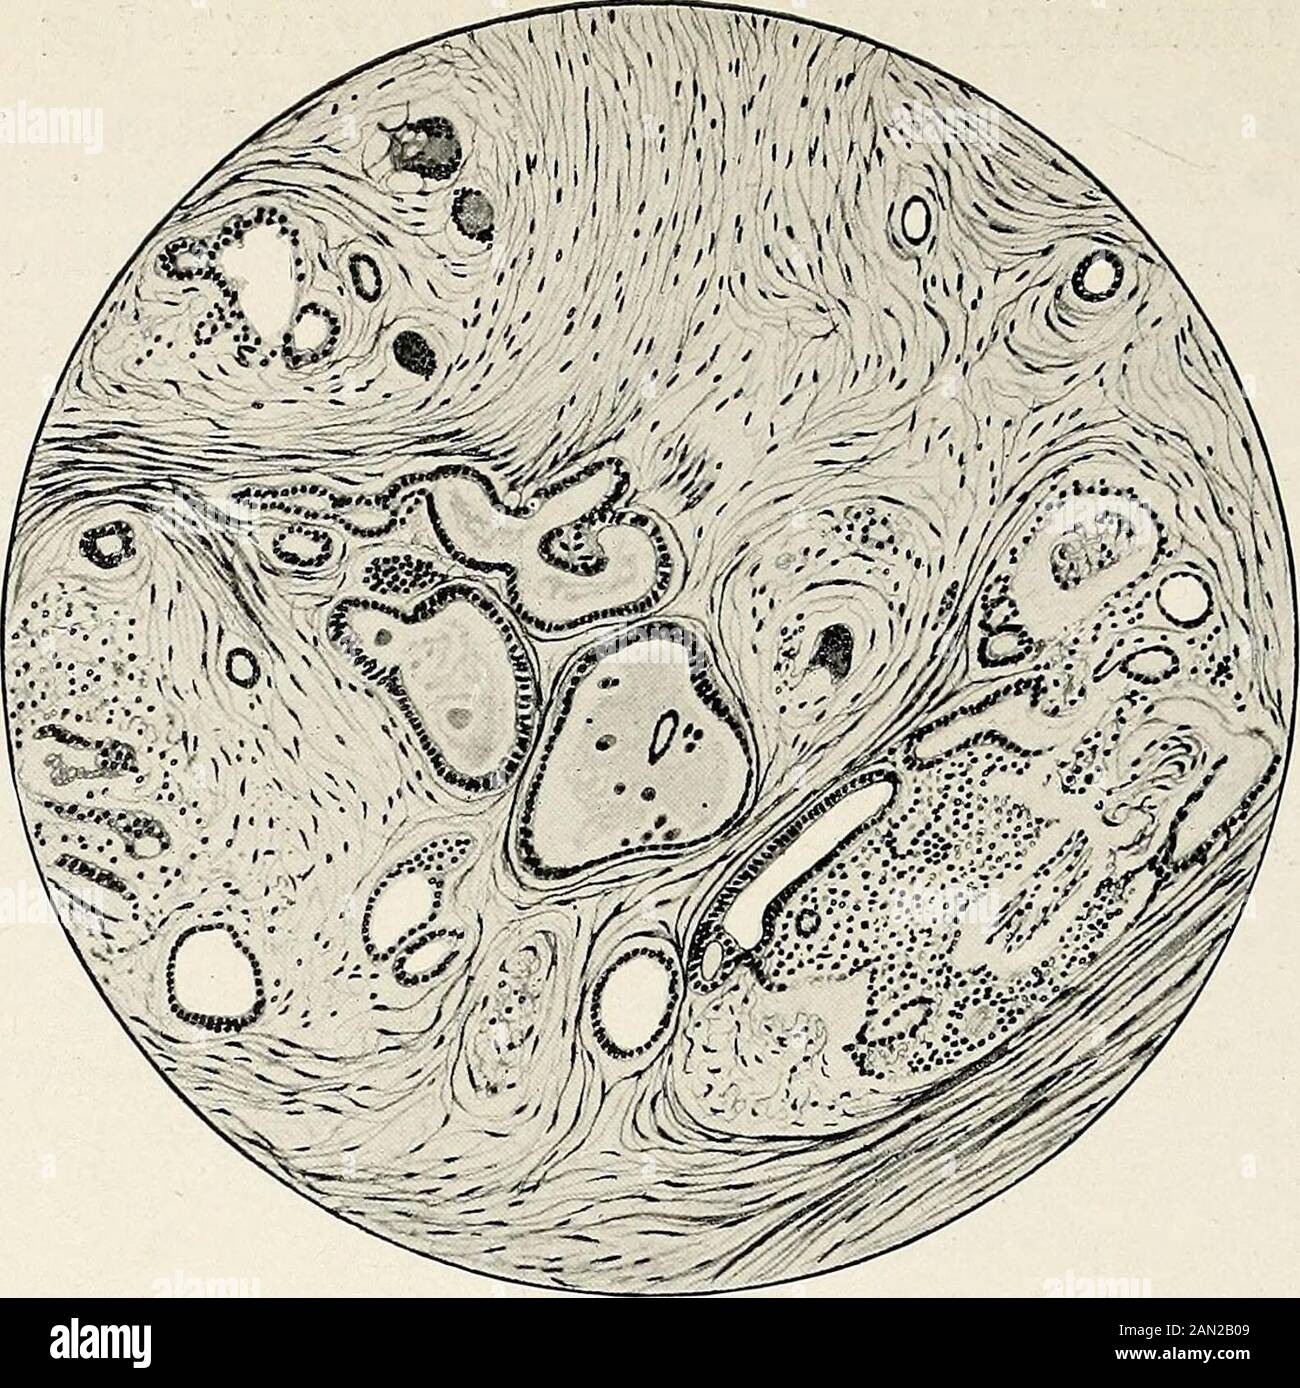 Gynaecology for students and practitioners . Fig. 337. Transverse Section of Tube through an Area of salpingitisisthmica nodosa. Note that the mucosal epithelium has penetrated themuscular strata, and appears as branching adenomatous follicles {salpingitis follicularis). muscular elements take on active hyperplasia in response to theirritation produced by the growing glandular tissue, and the result isa well-defined nodule. This process may spread into the interstitialpart of the tube, and may expand the tubal isthmus, so that at the. Fig. 338. Portion of Fig. 337 under a High Power. Note the Stock Photo